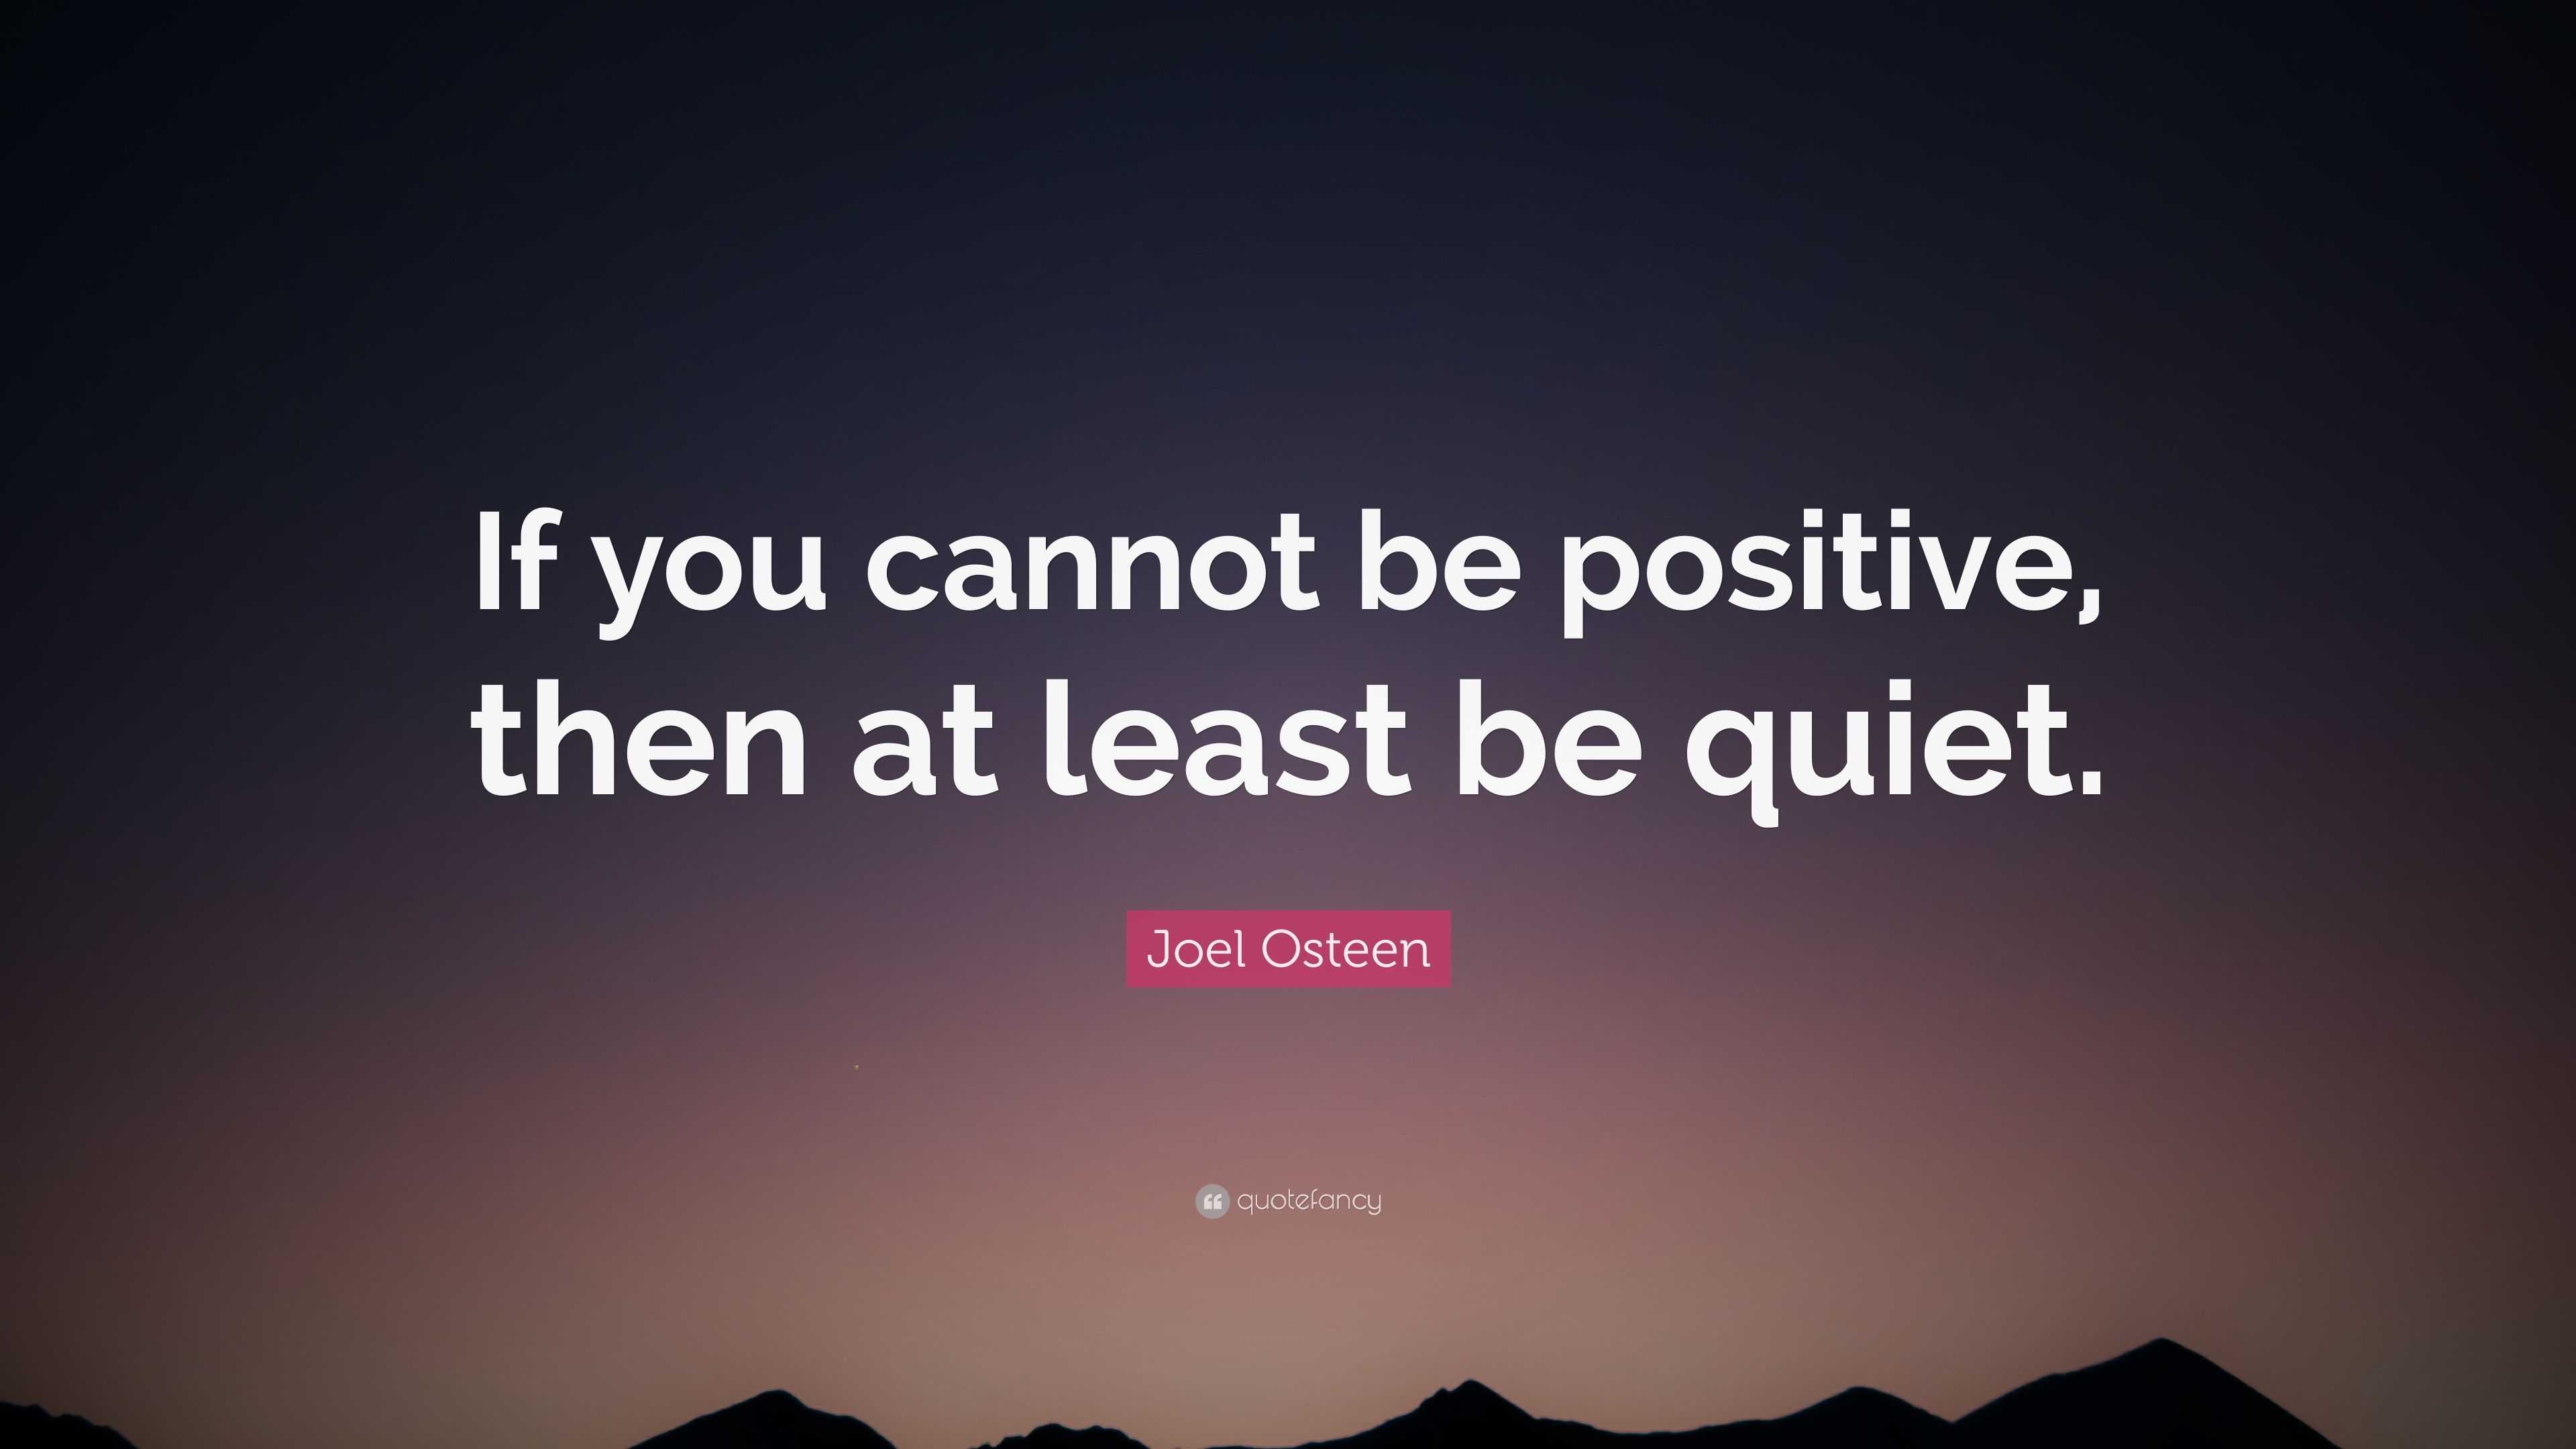 Joel Osteen Quote “if You Cannot Be Positive Then At Least Be Quiet”